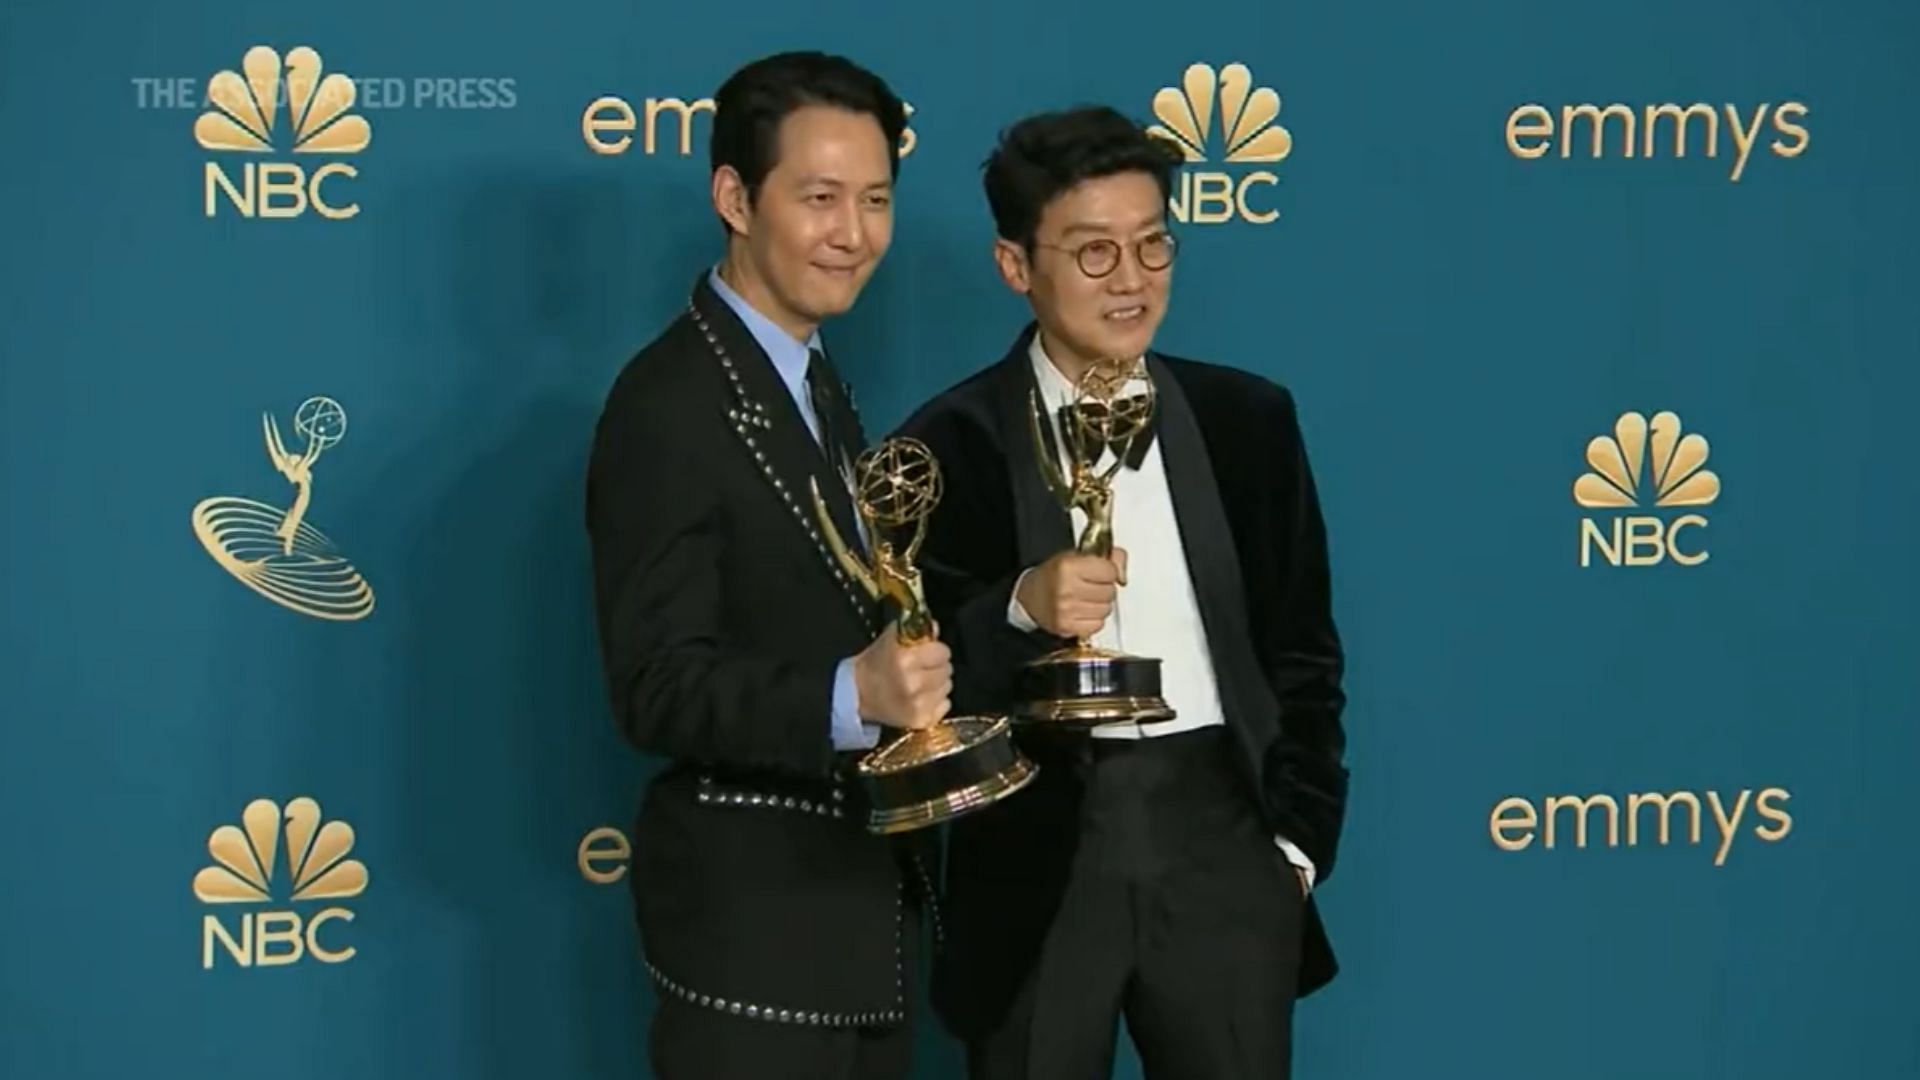 Squid Game actor Lee Jung-jae and director Hwang Dong-hyuk grab spotlight to make history at Emmys 2022 (Image via Getty Images/Allen J. Schaben)